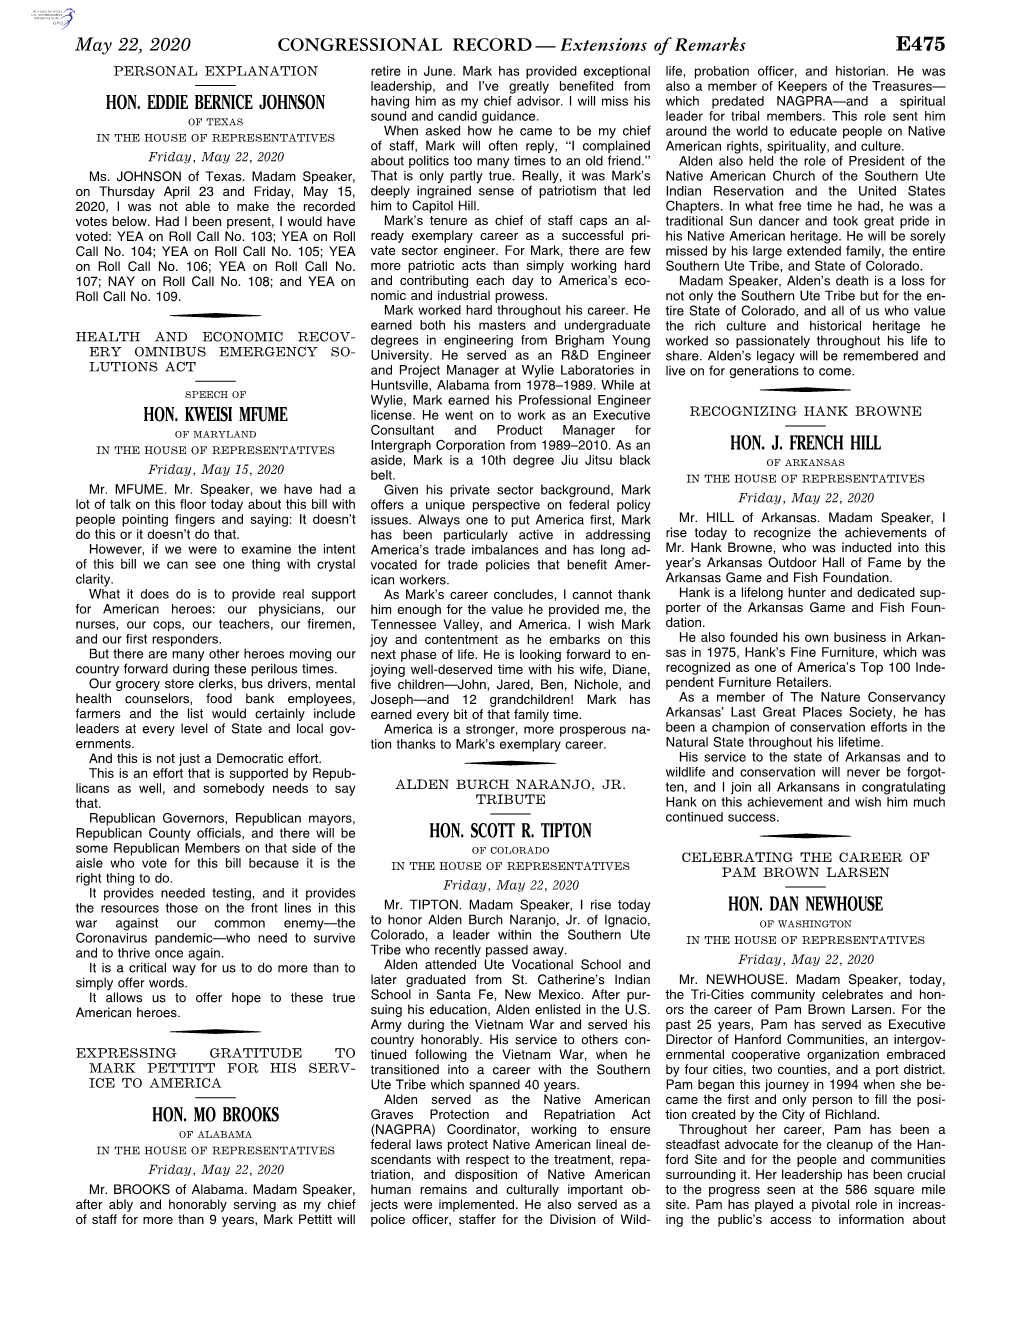 CONGRESSIONAL RECORD— Extensions of Remarks E475 HON